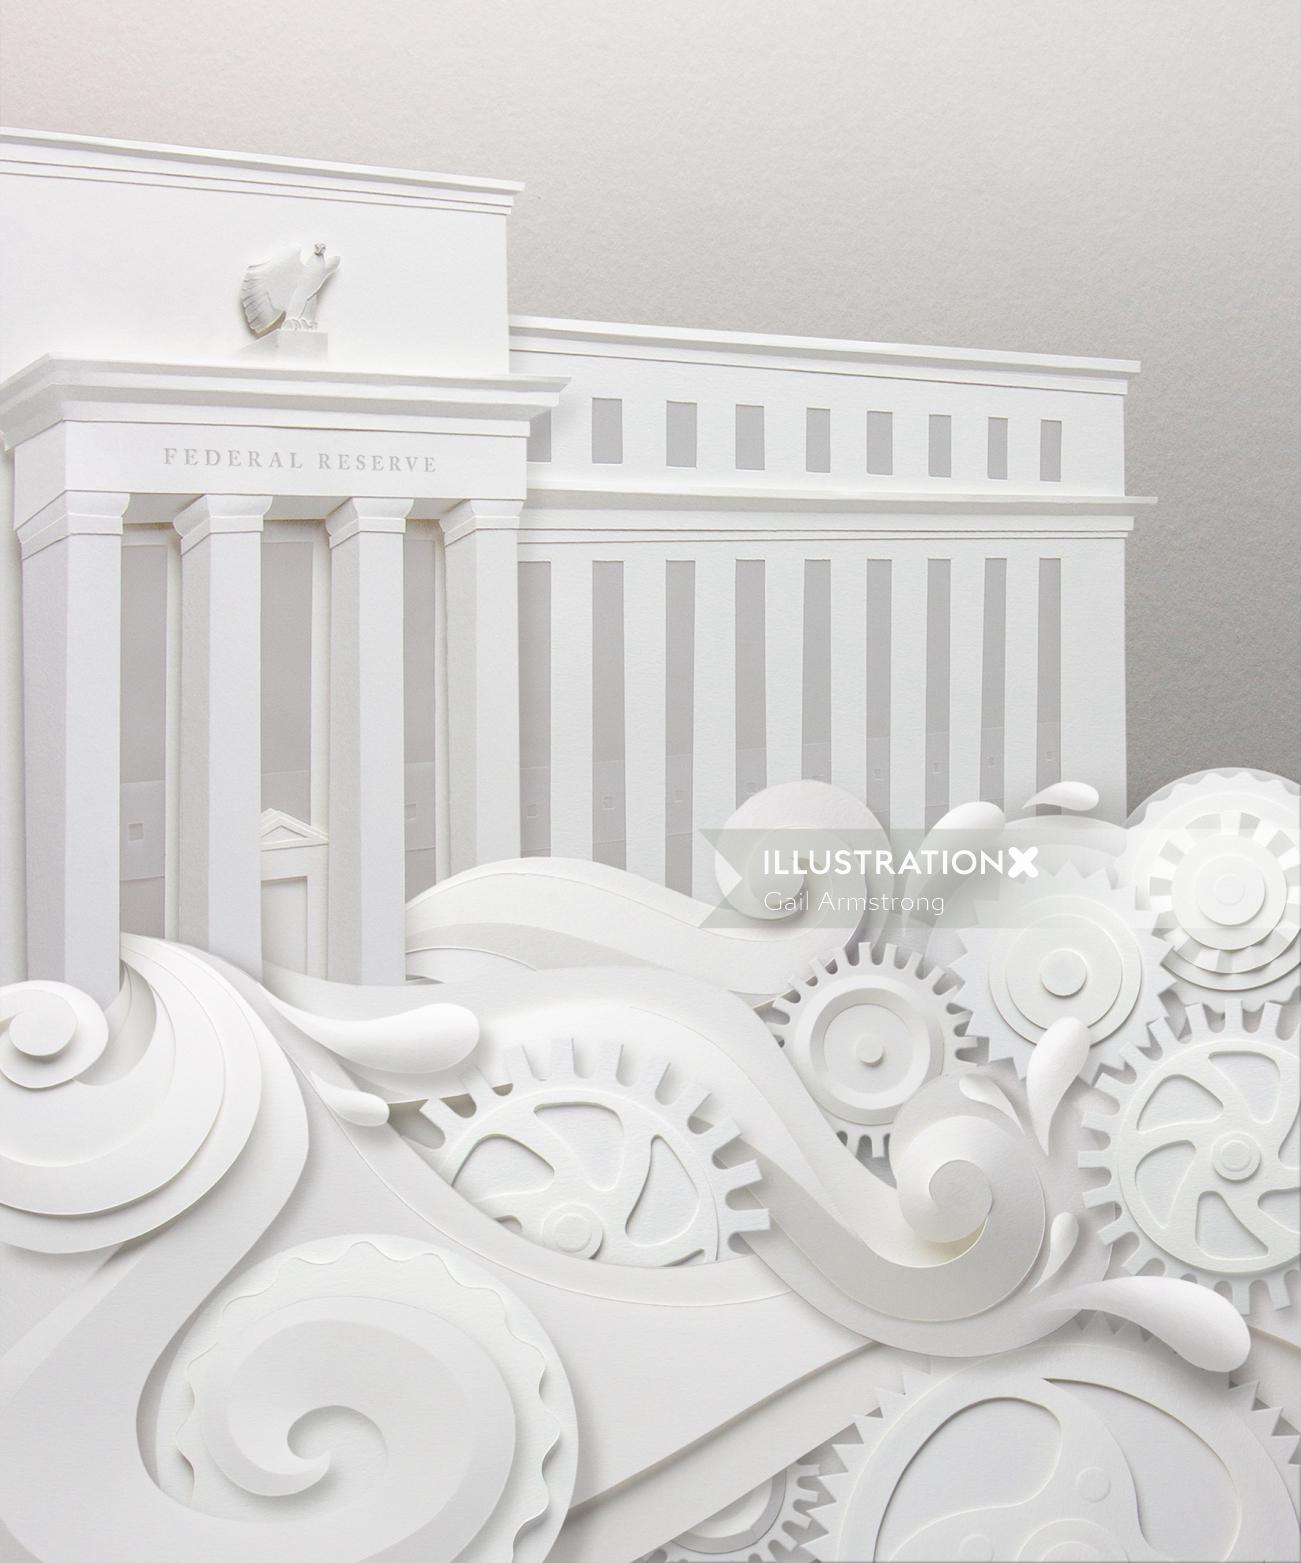 Paper art of  water flowing from The Federal